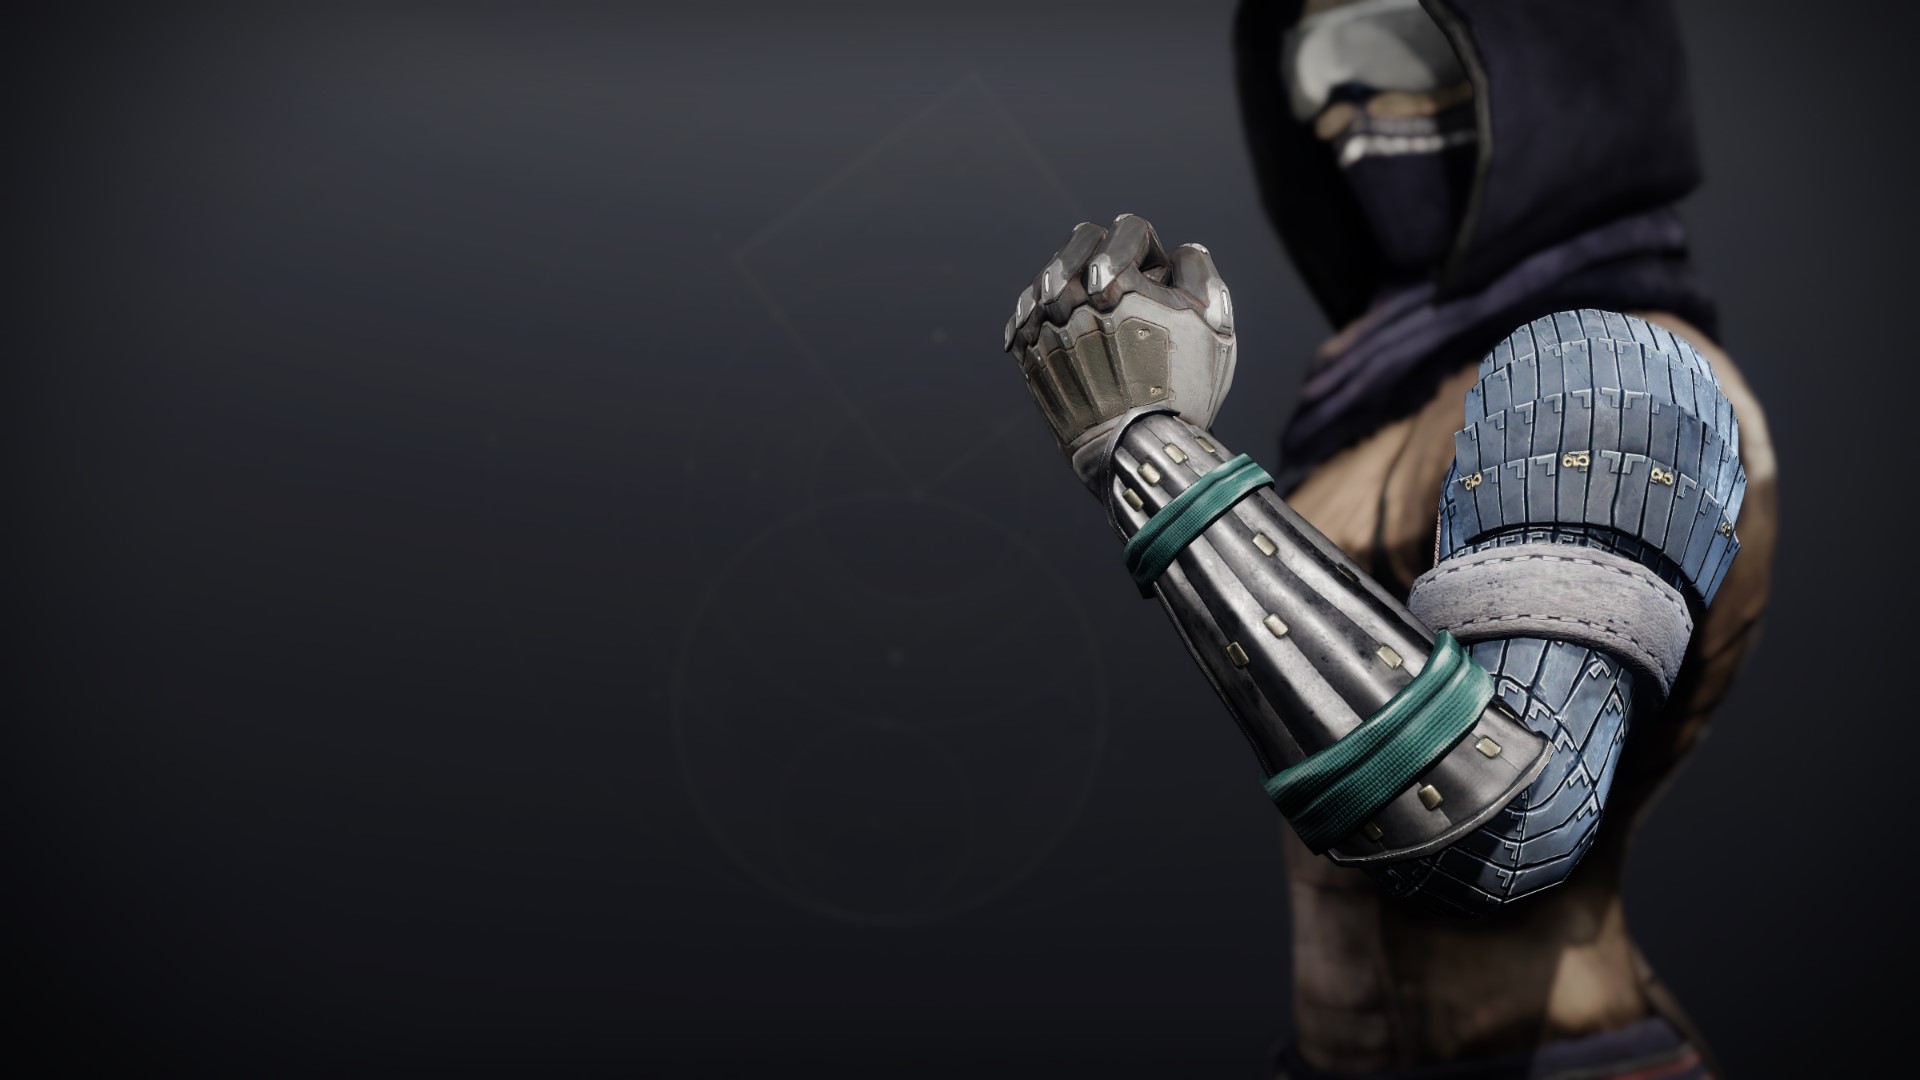 An in-game render of the Iron Symmachy Grips.